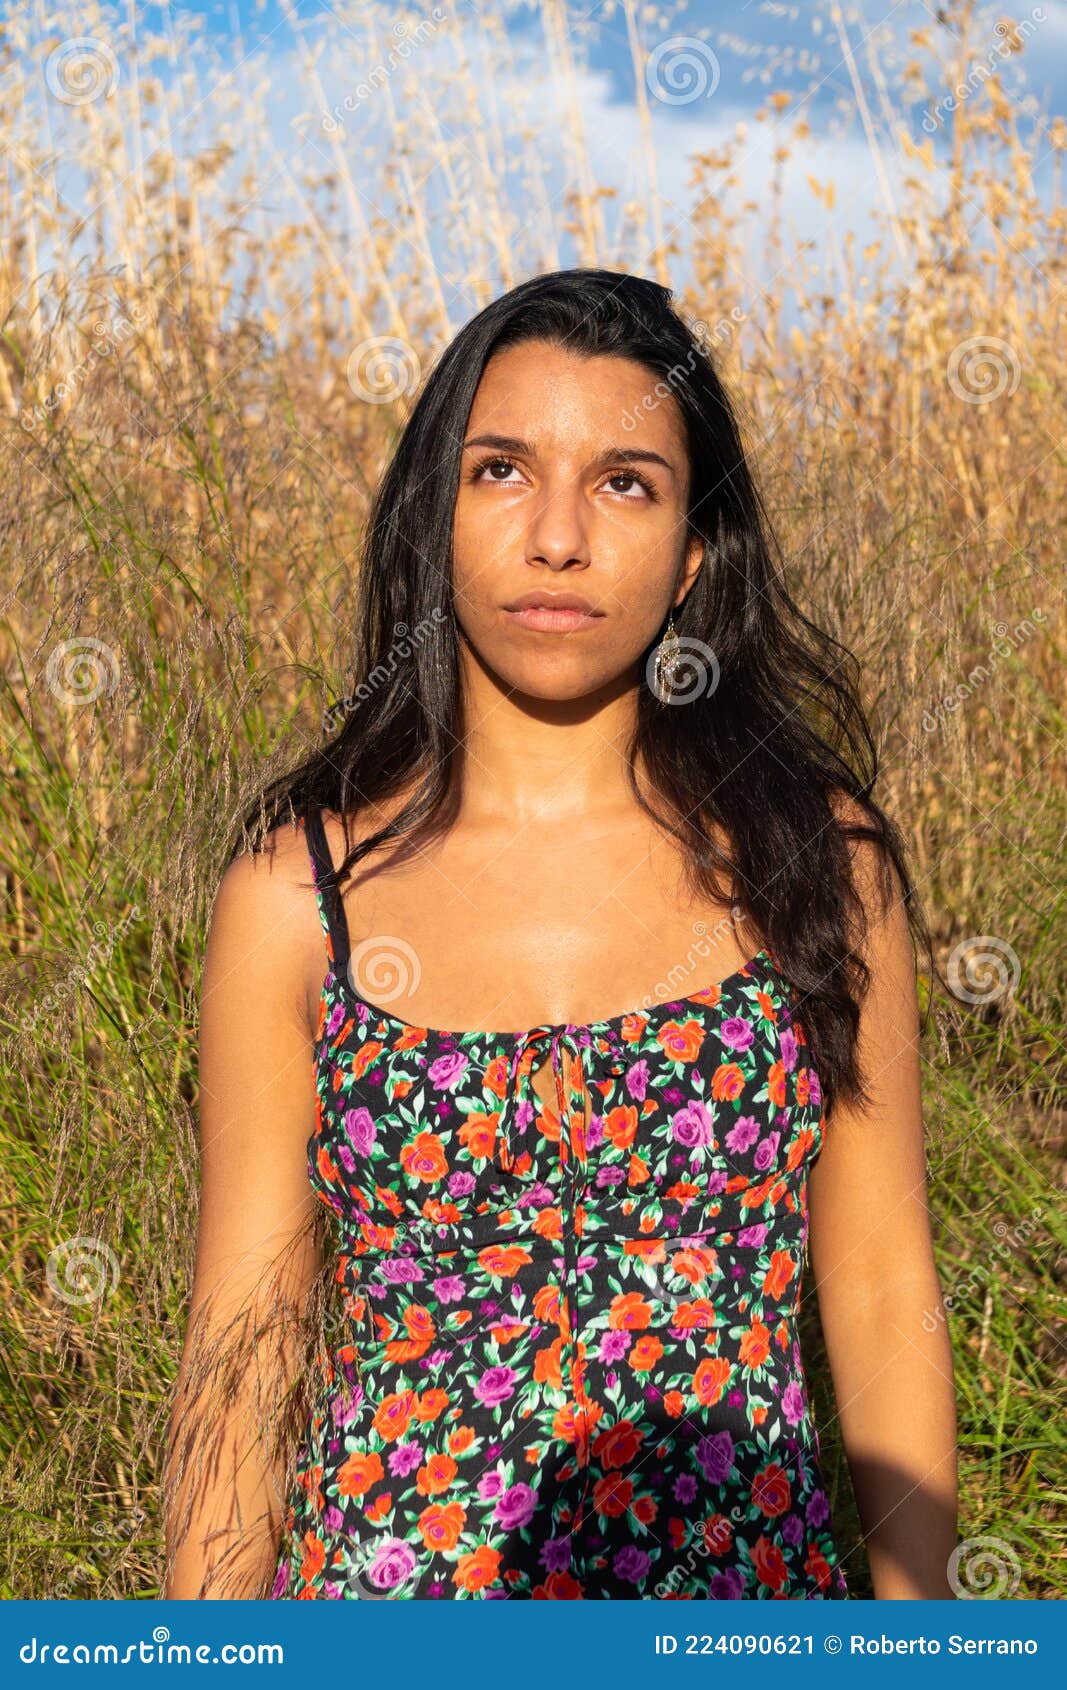 Girl With A Floral Dress Looking Up In Tall Grass Stock Image Image Of Pretty Girl 224090621